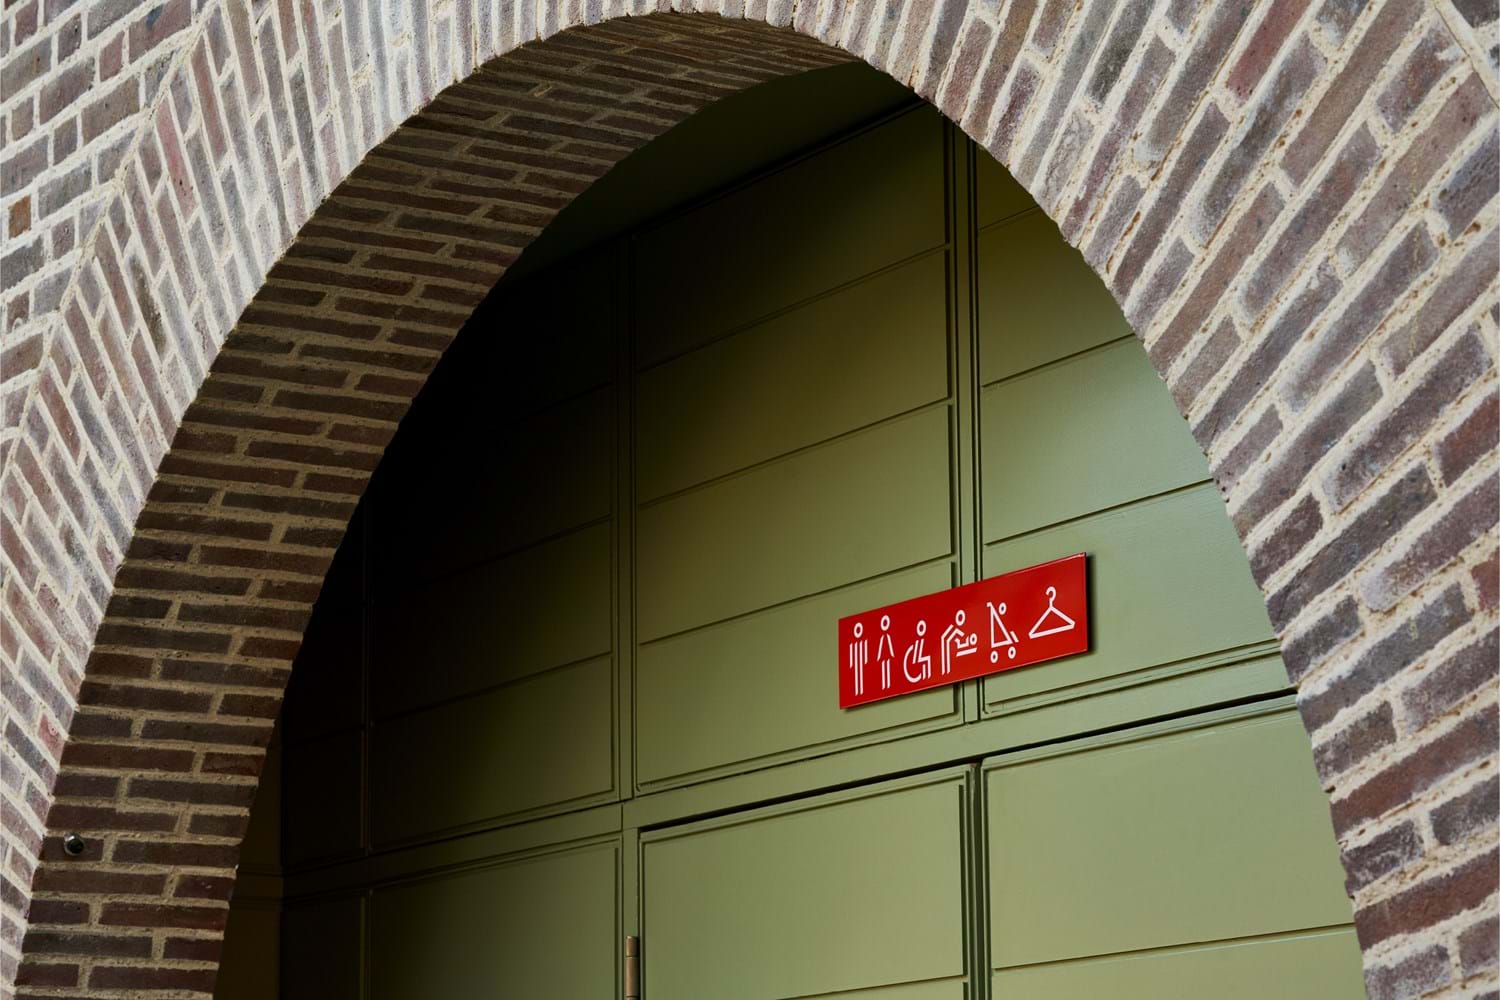 A brick arch framing green doors with red signage, displaying symbols for bathrooms, wheelchair users, changing facilities and buggies.